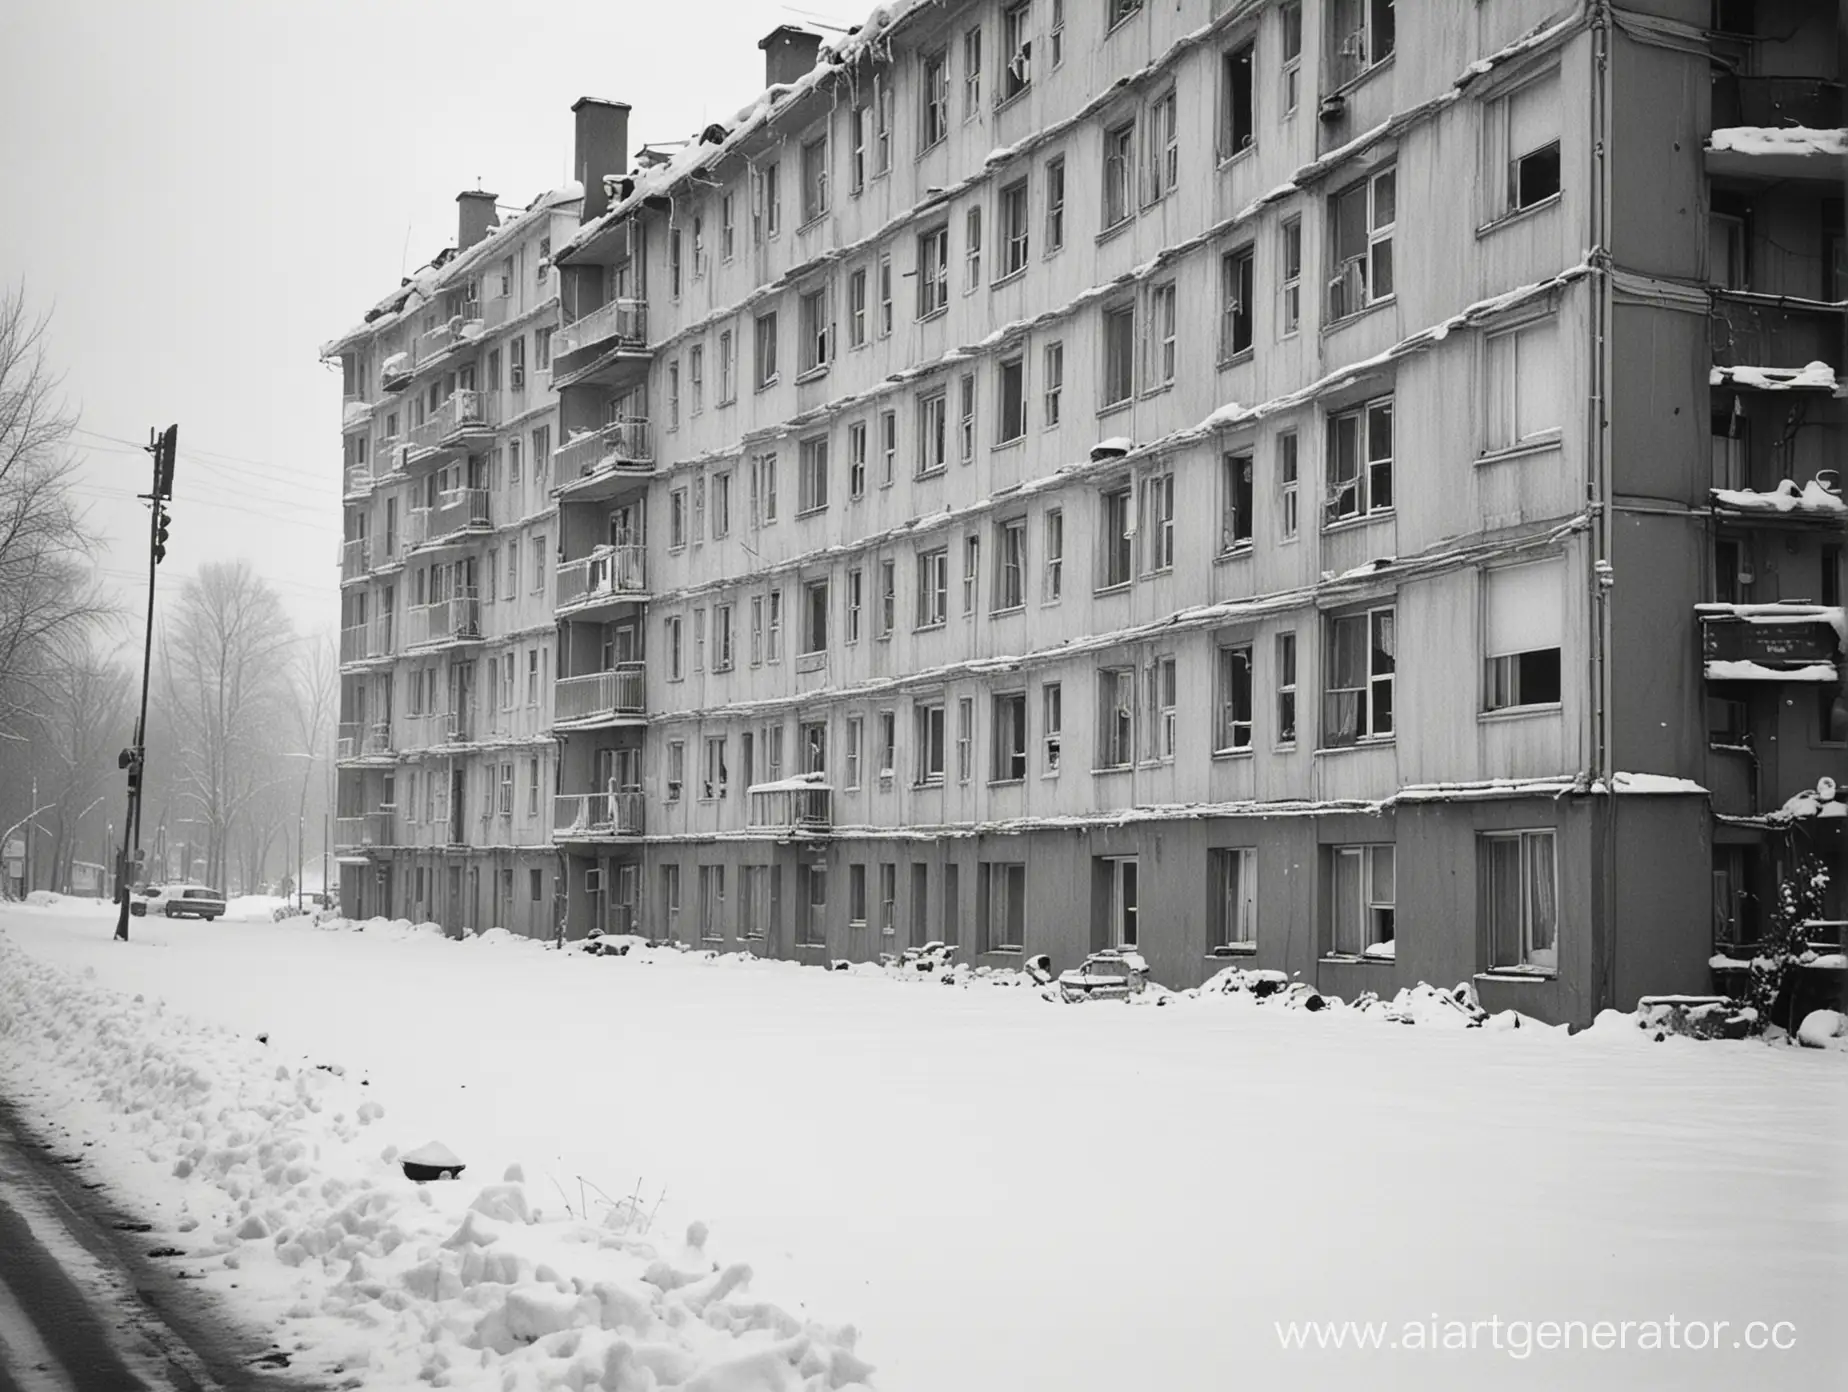 A shot of a broken down low panel block of flats, in a Russian town shrouded in high snow, where there are no people anymore. in the background there is an endless black forest, sometimes you can see glittering white eyes in it. black and white photo in the style of an old tape recorder, high contrast. cinema trailer.